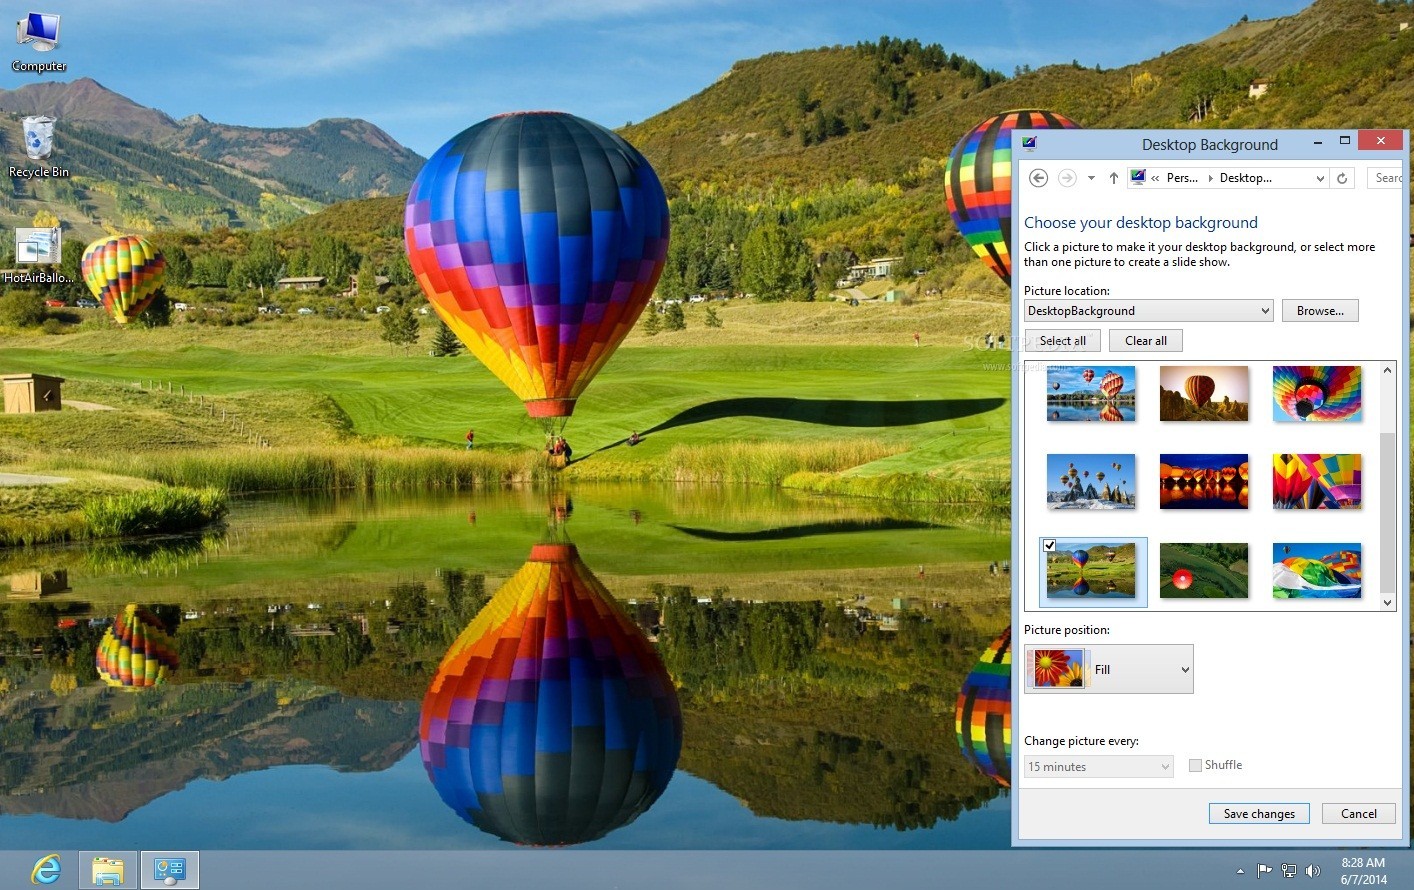 sample Pointer reading Download Microsoft's Hot Air Balloons Theme for Windows 8.1